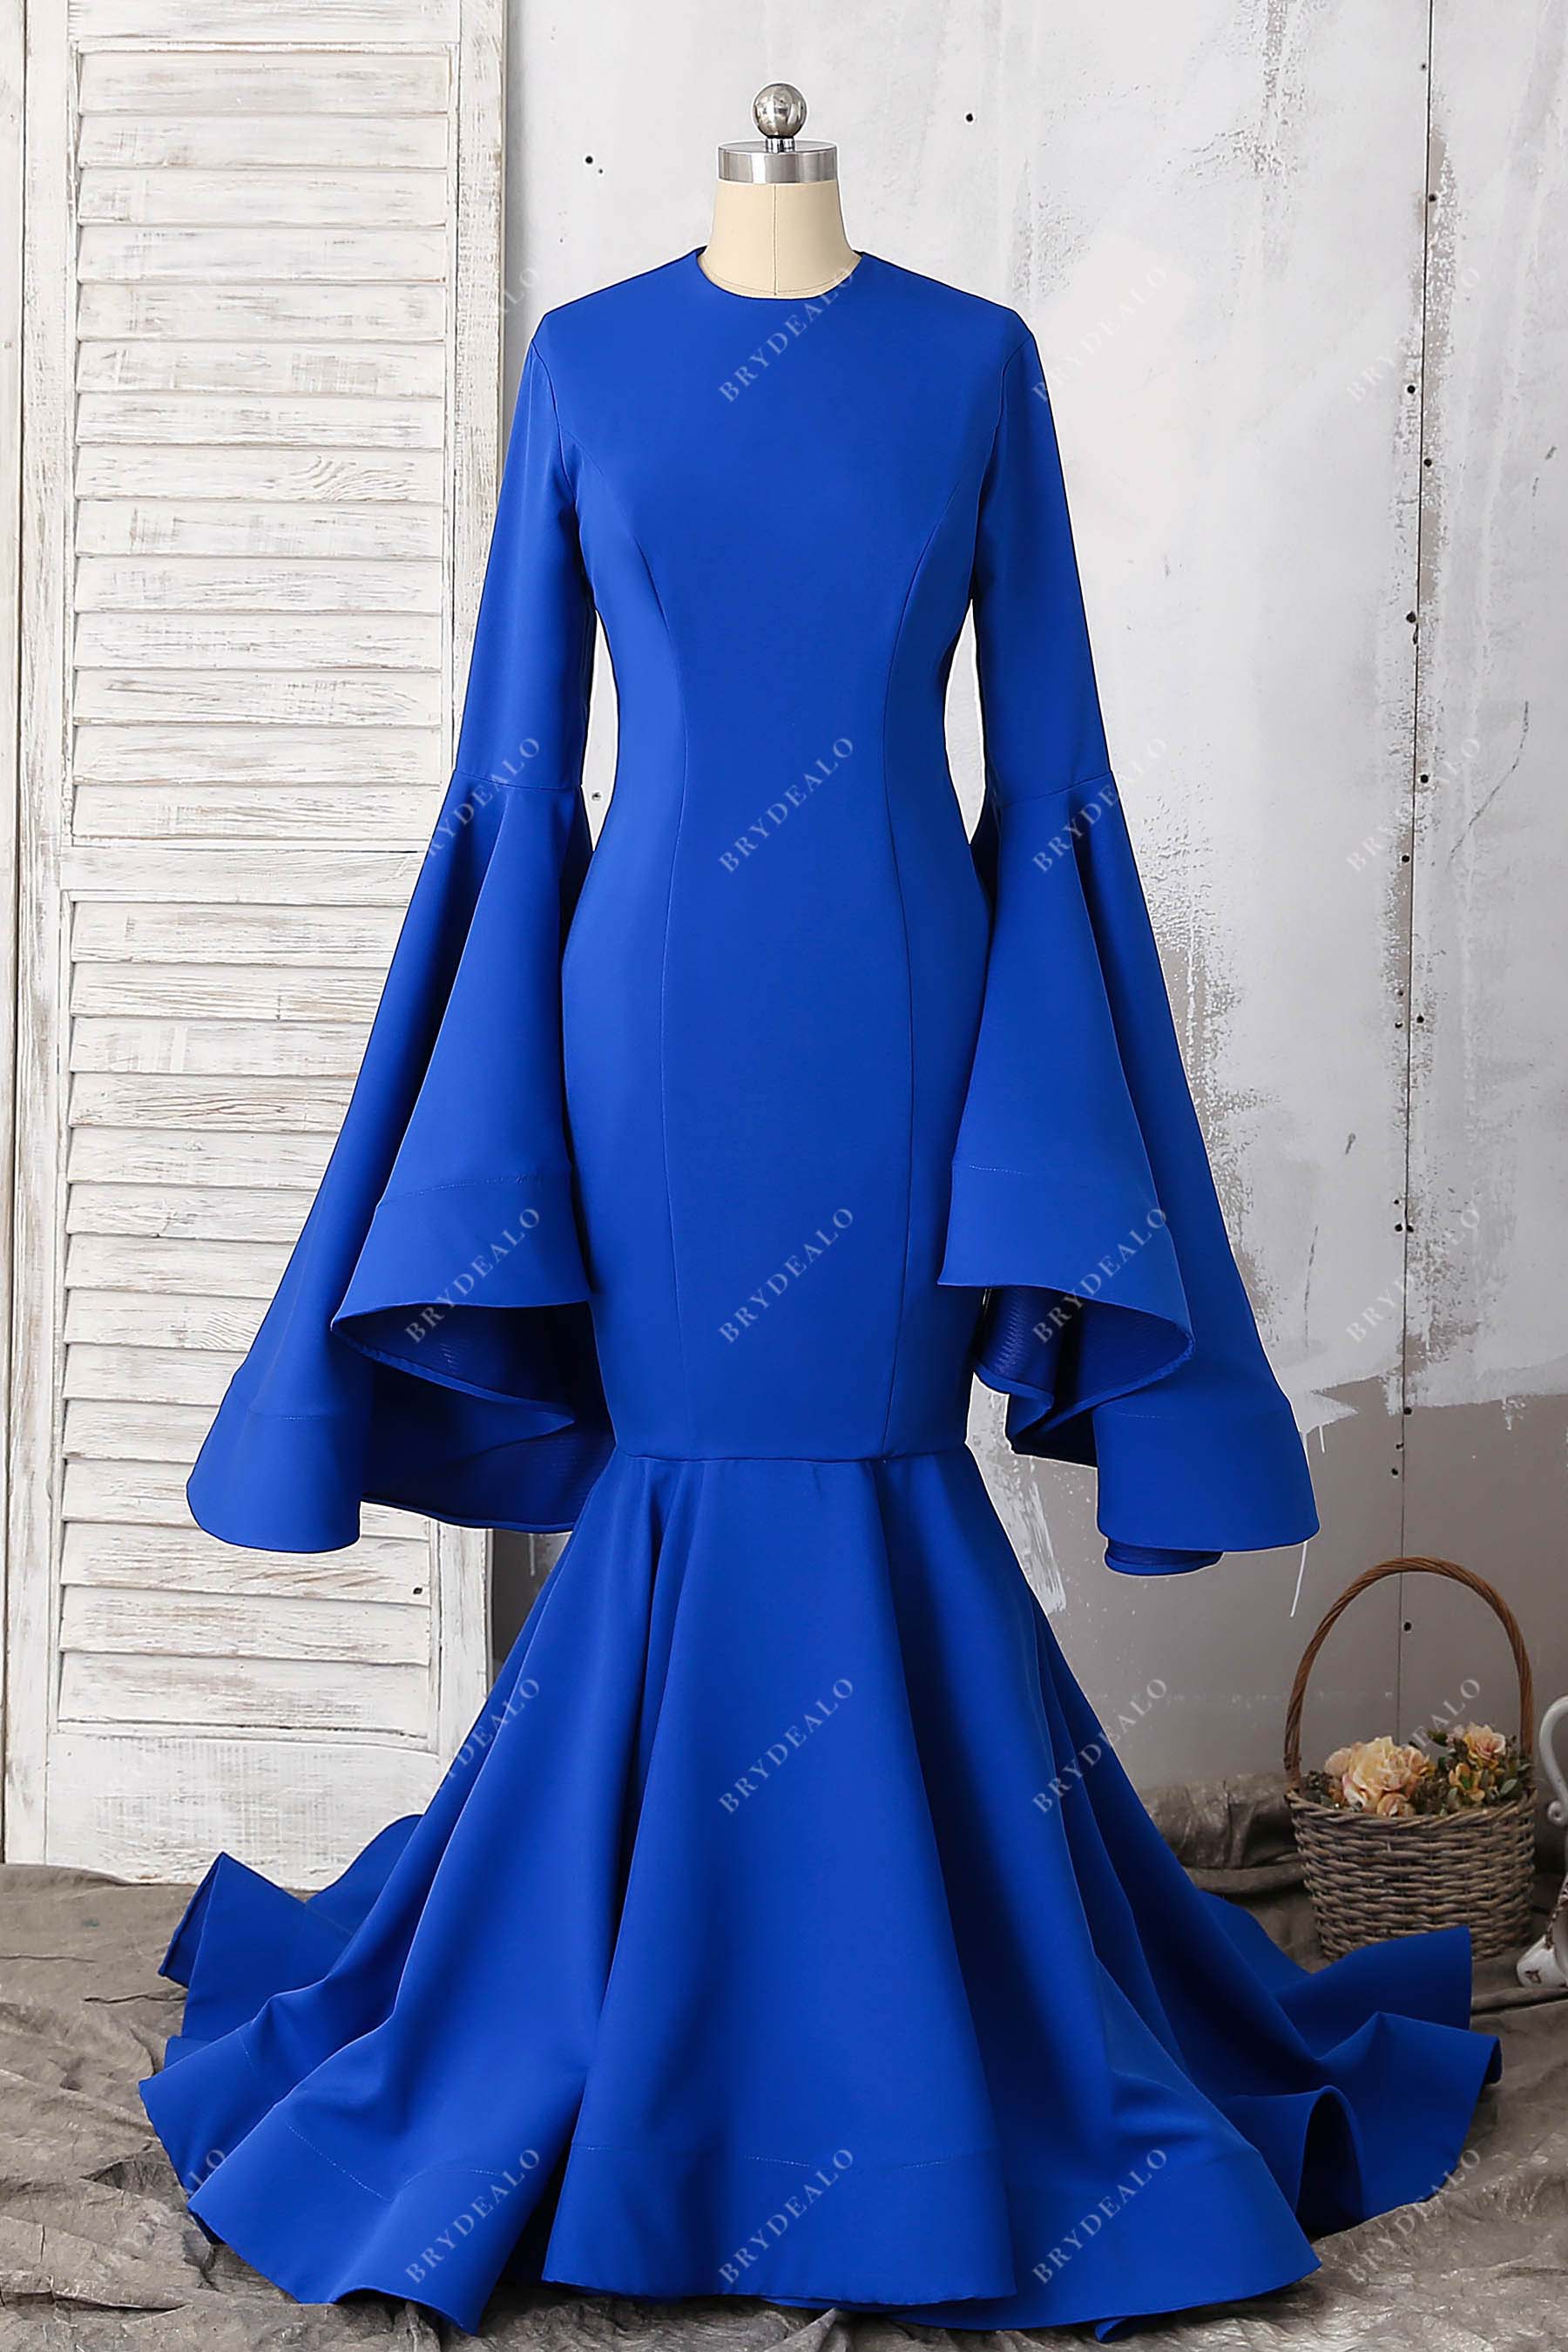 Unique Inspired Bell Sleeve Royal Blue Trumpet Dress